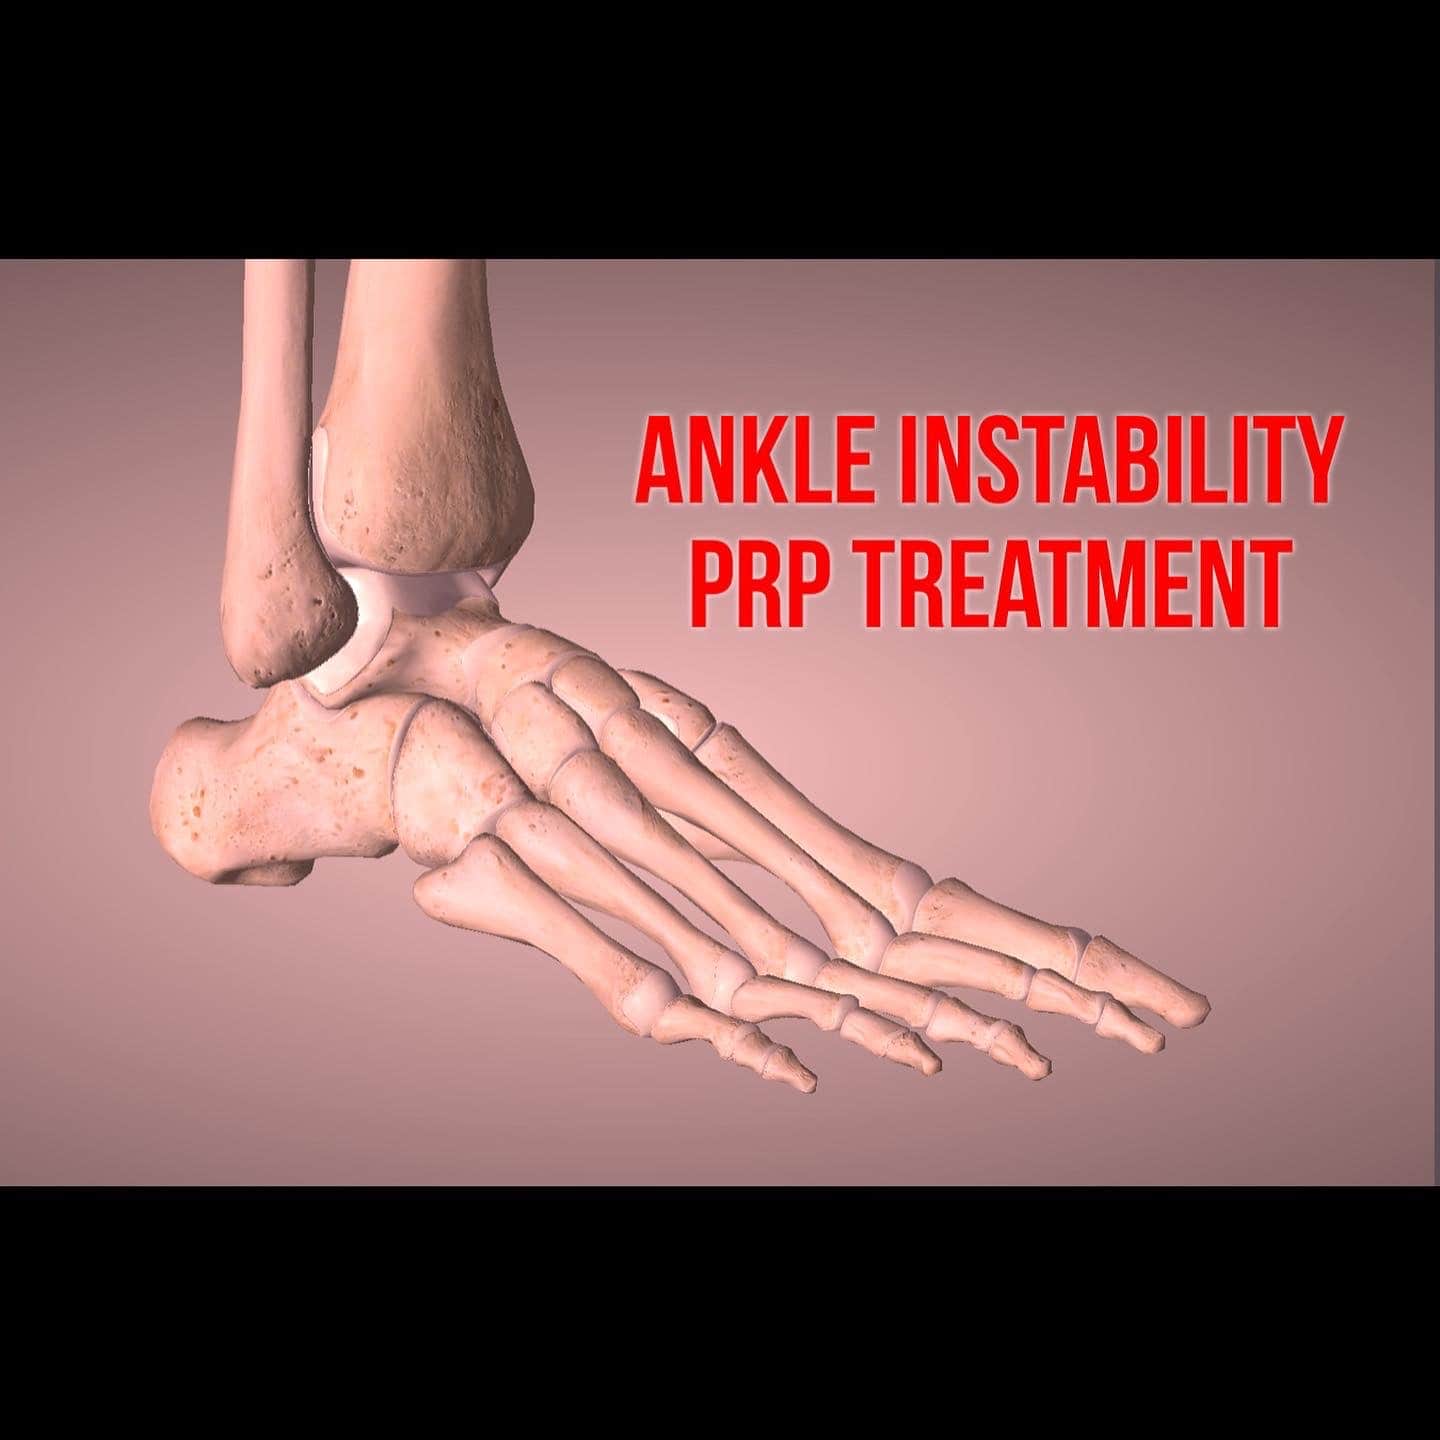 Treating ankle pain with PRP